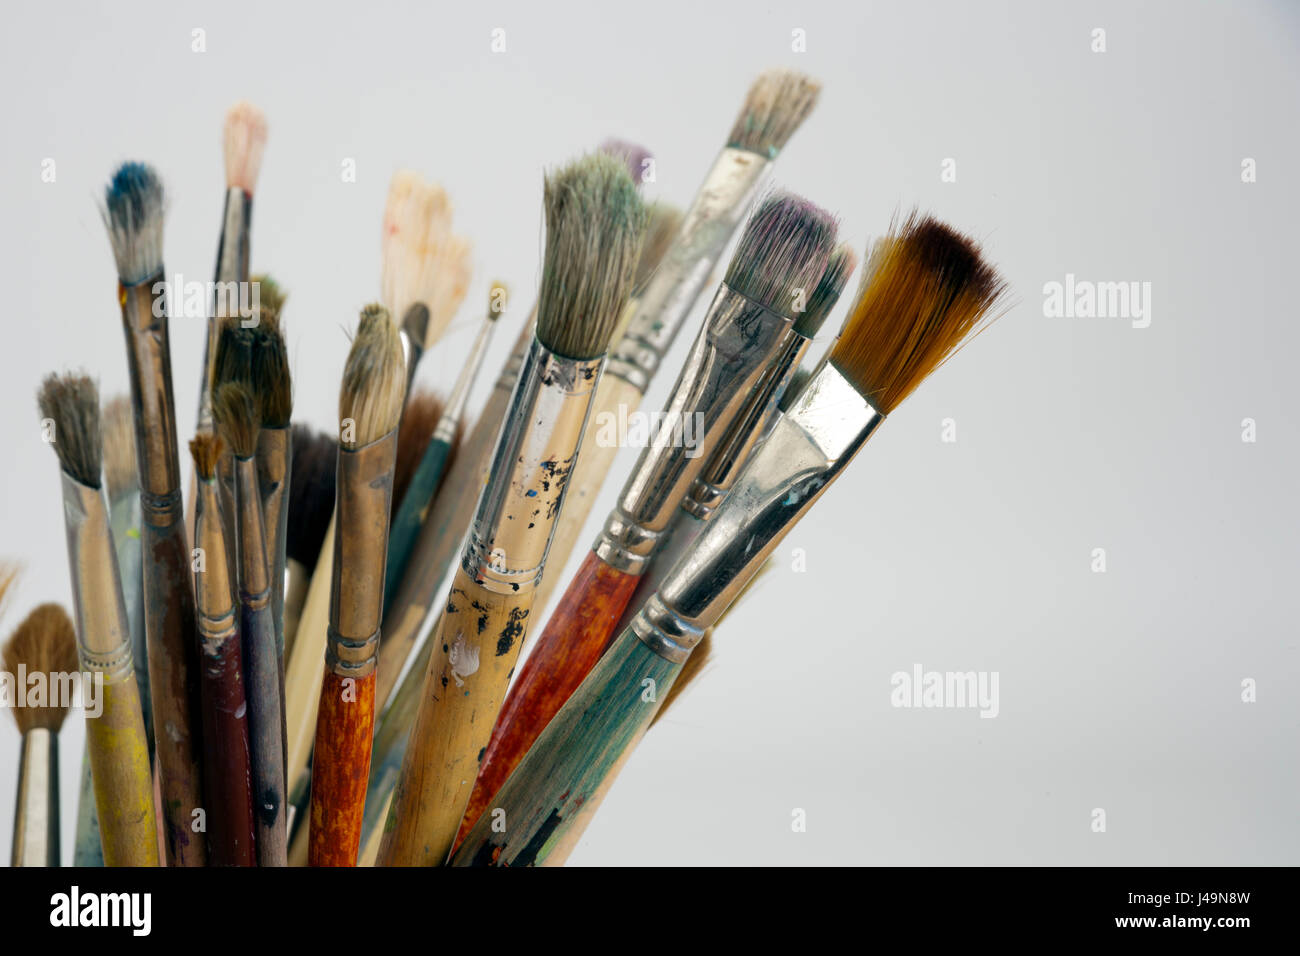 A collection of well used art paint brushes in an old jug in front of a white background Stock Photo